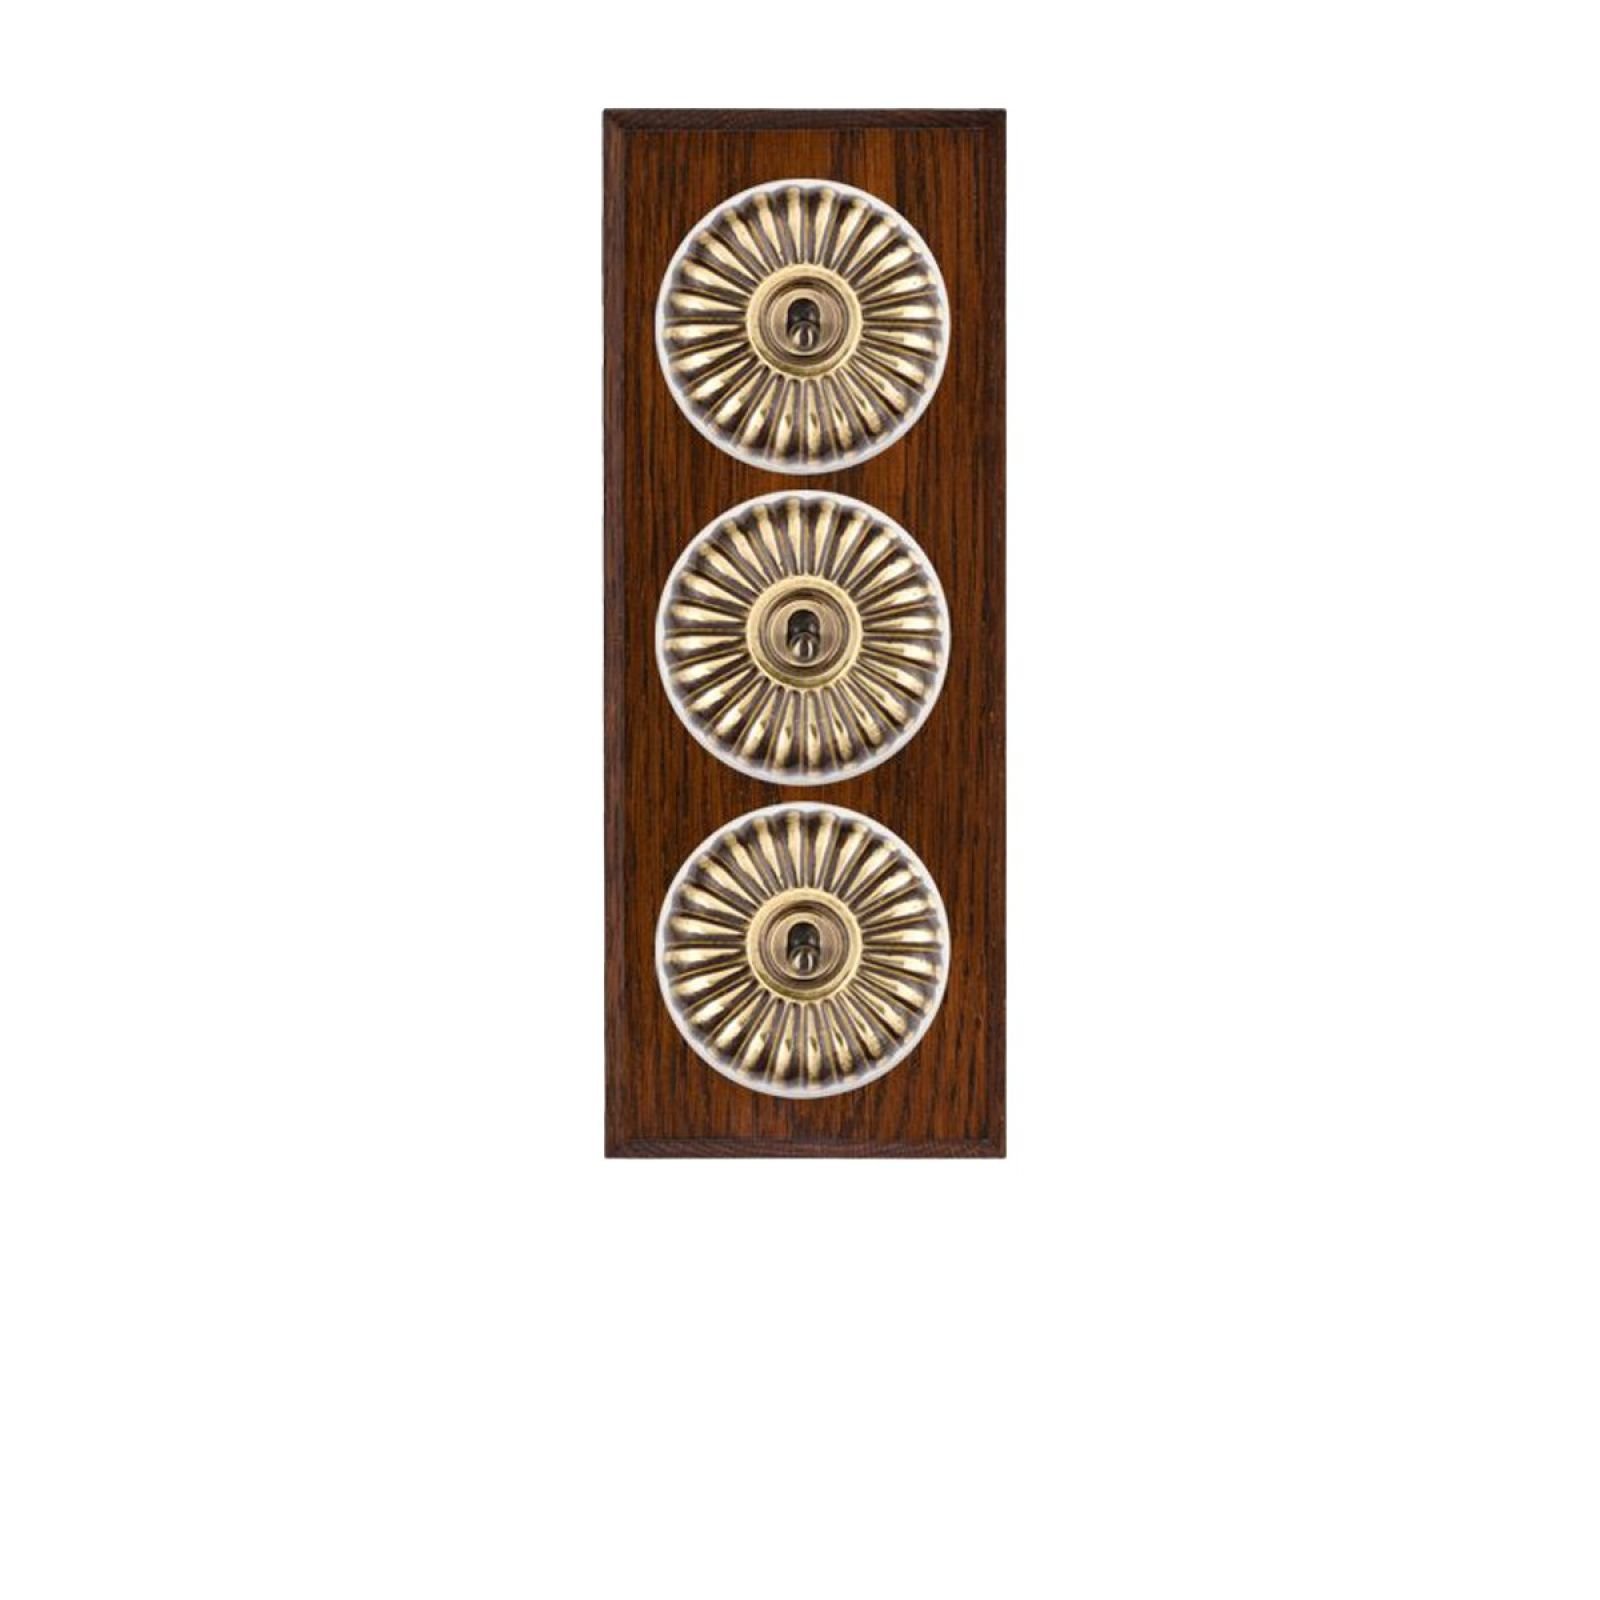 Decorative Fluted Victorian Light Switch - 3 gang